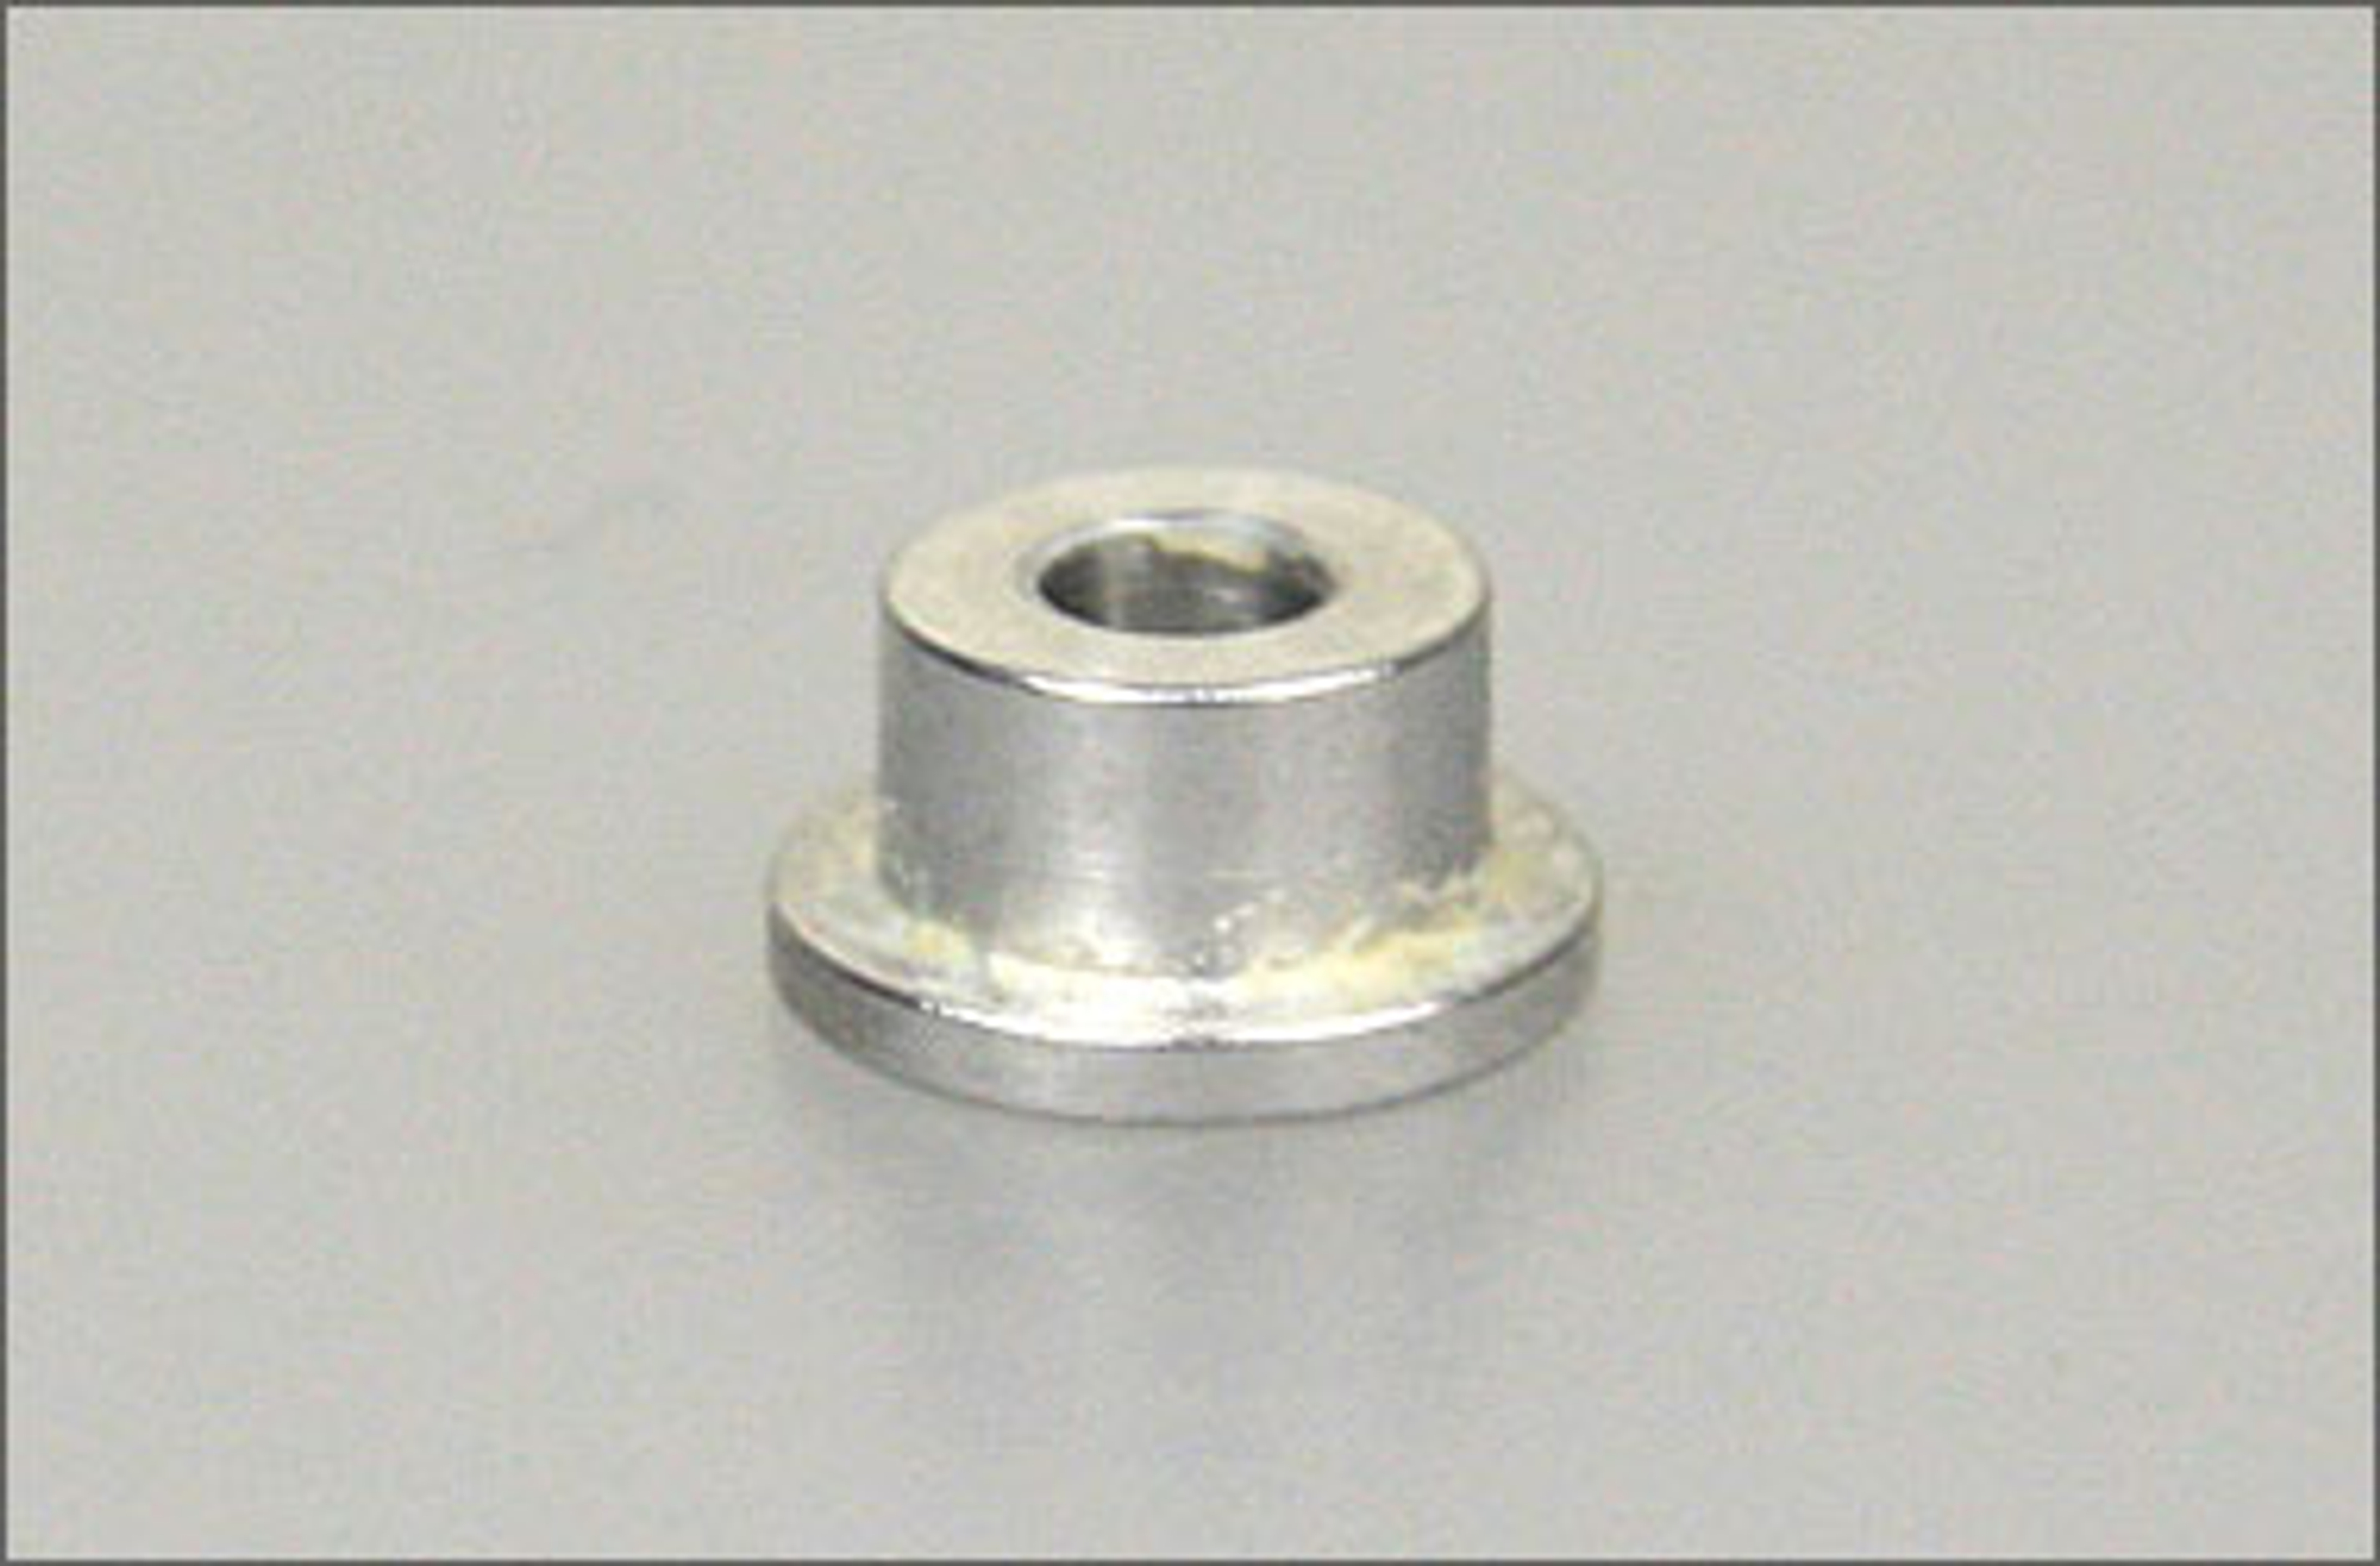 3000-05 Mecatech Bushing for Mastercylinder, 1 pce.